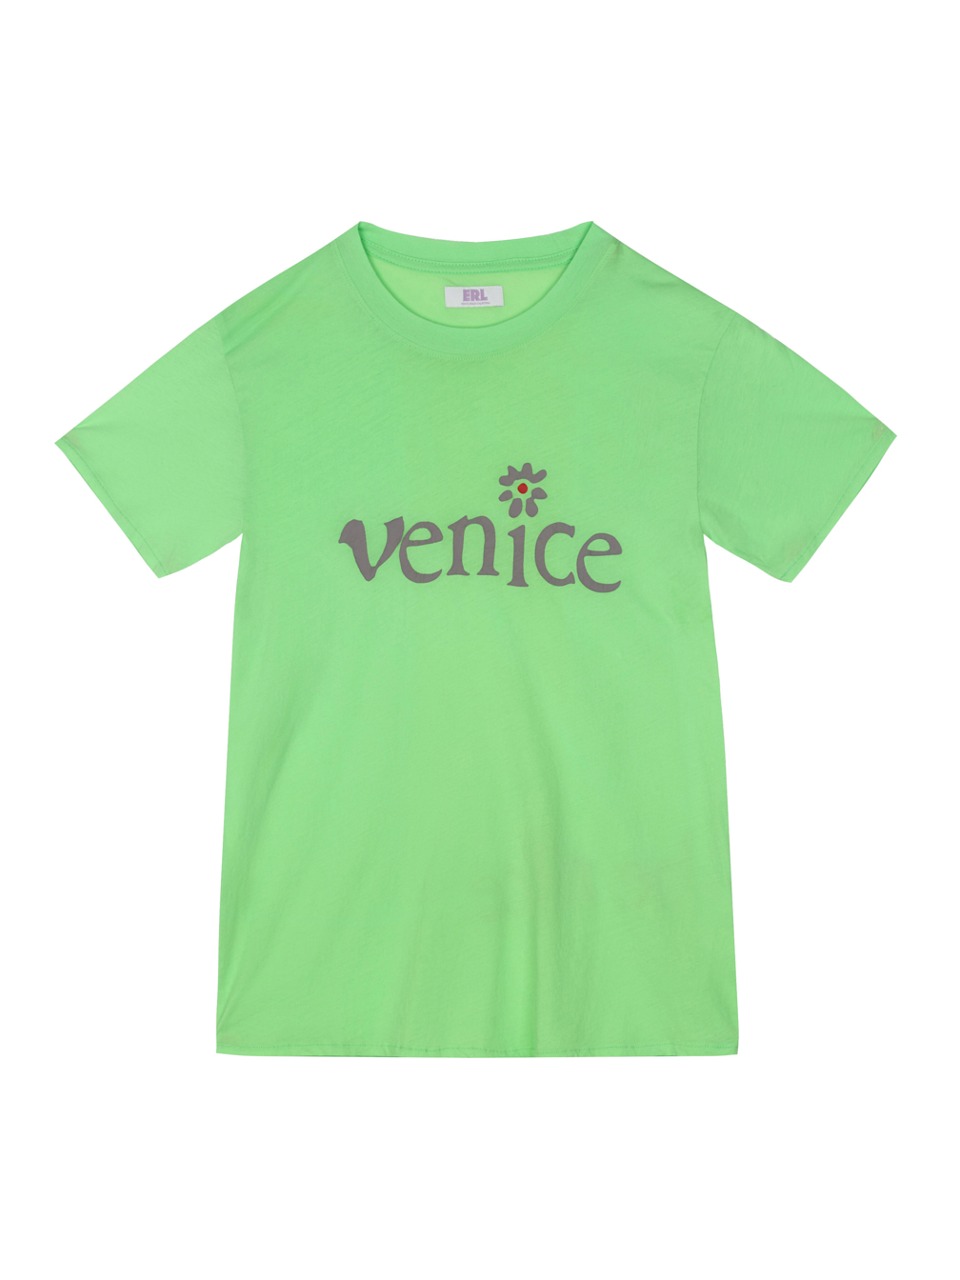 ERL - VENICE PRINTED COTTON T SHIRT (GREEN)